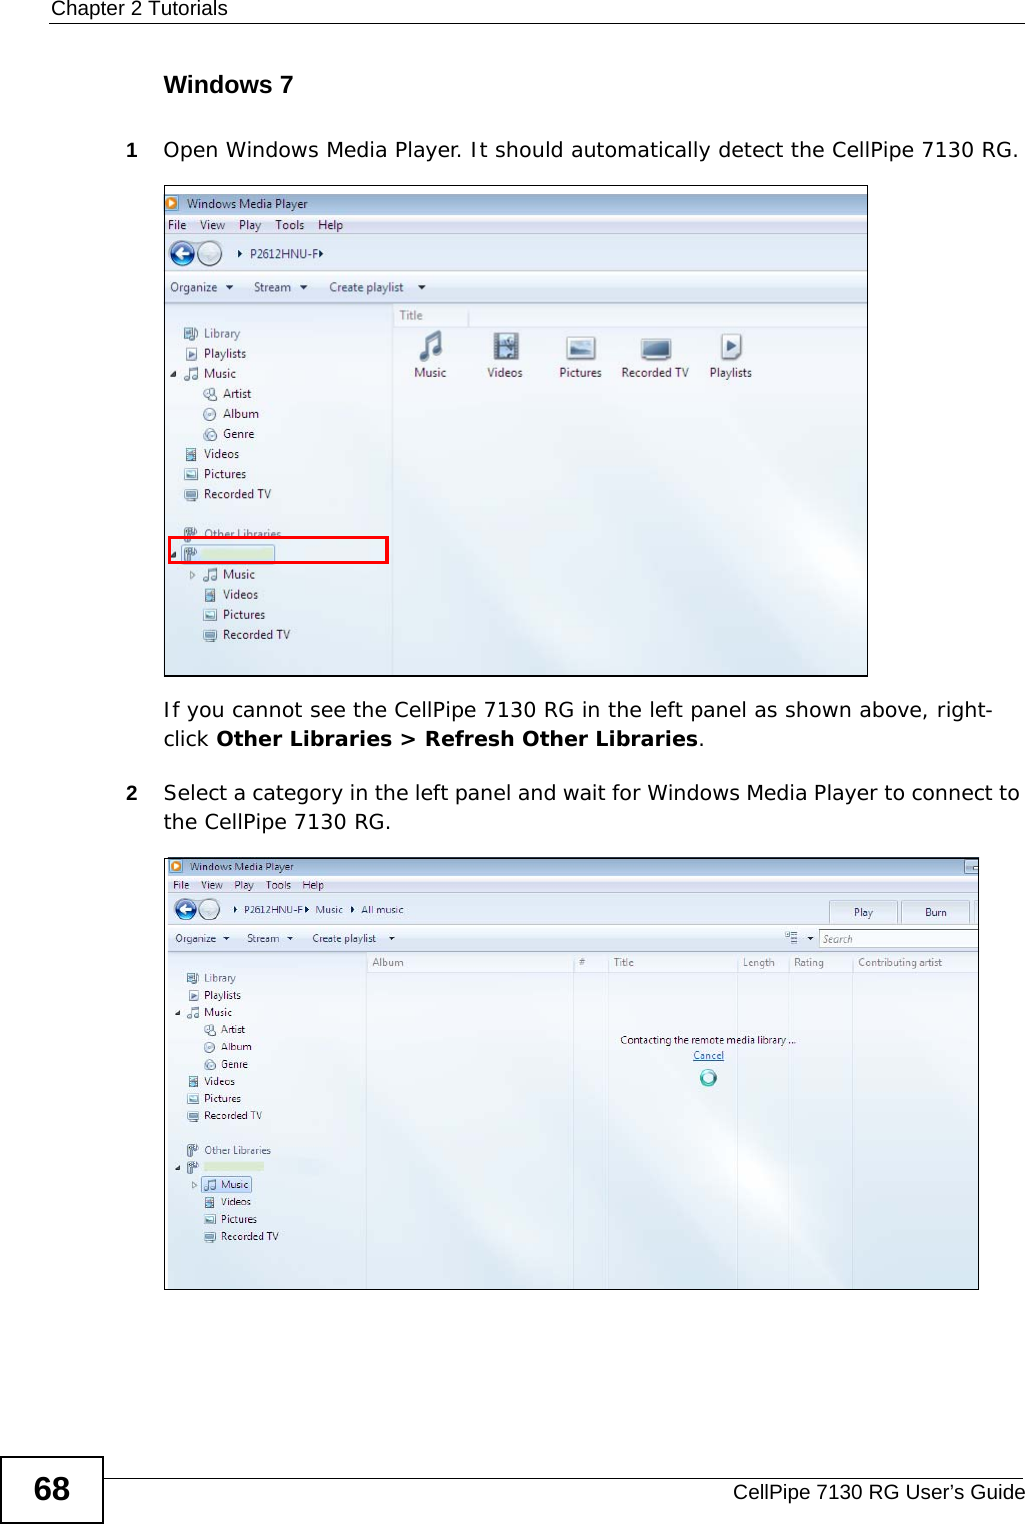 Chapter 2 TutorialsCellPipe 7130 RG User’s Guide68Windows 71Open Windows Media Player. It should automatically detect the CellPipe 7130 RG.Tutorial: Media Sharing using Windows 7 (1)If you cannot see the CellPipe 7130 RG in the left panel as shown above, right-click Other Libraries &gt; Refresh Other Libraries.2Select a category in the left panel and wait for Windows Media Player to connect to the CellPipe 7130 RG.Tutorial: Media Sharing using Windows 7 (2)